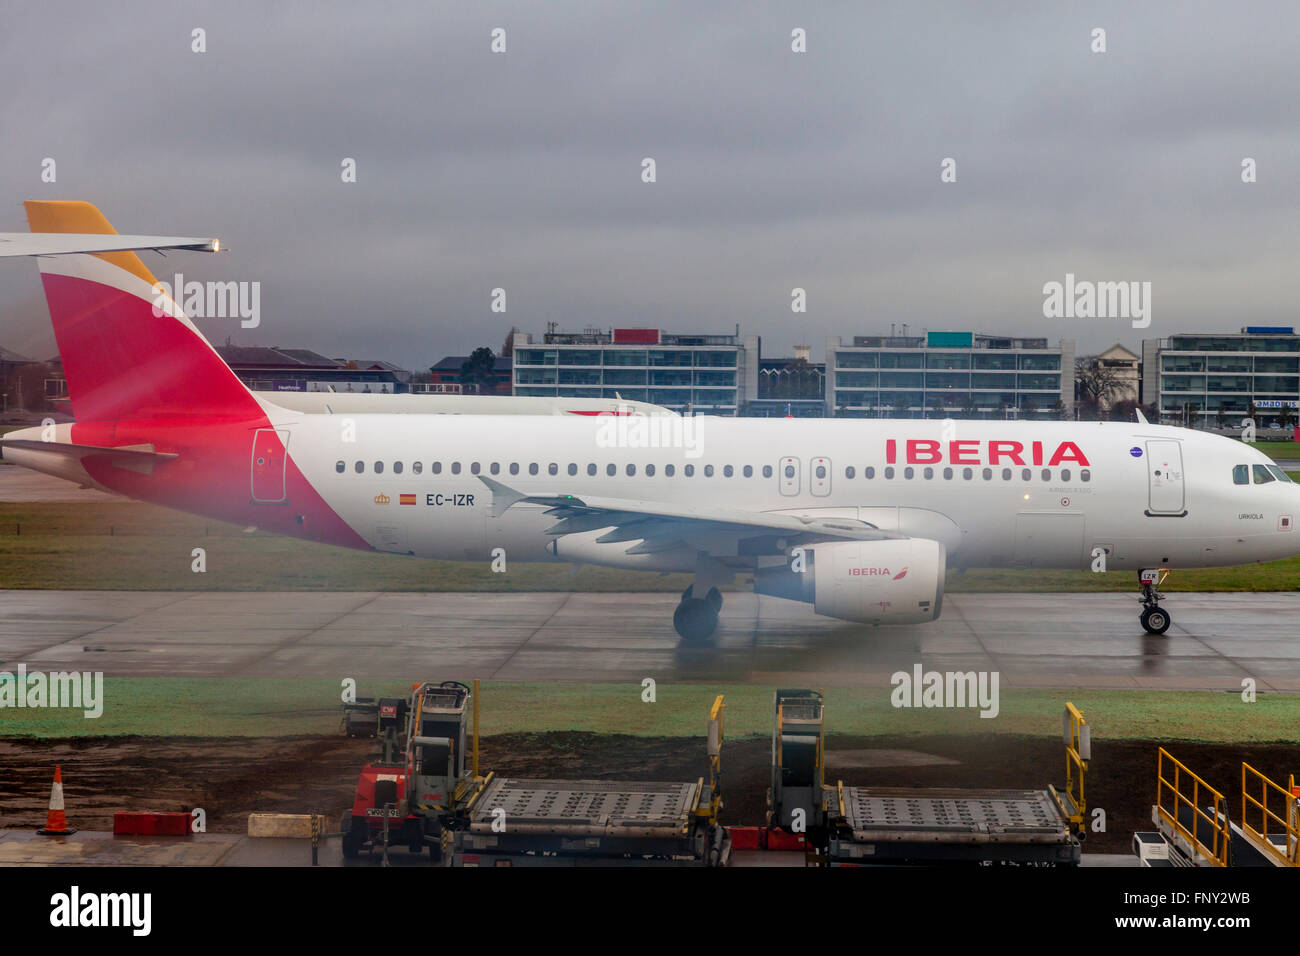 A Flight From The Spanish Airline IBERIA Lands At Heathrow Airport, London, England Stock Photo